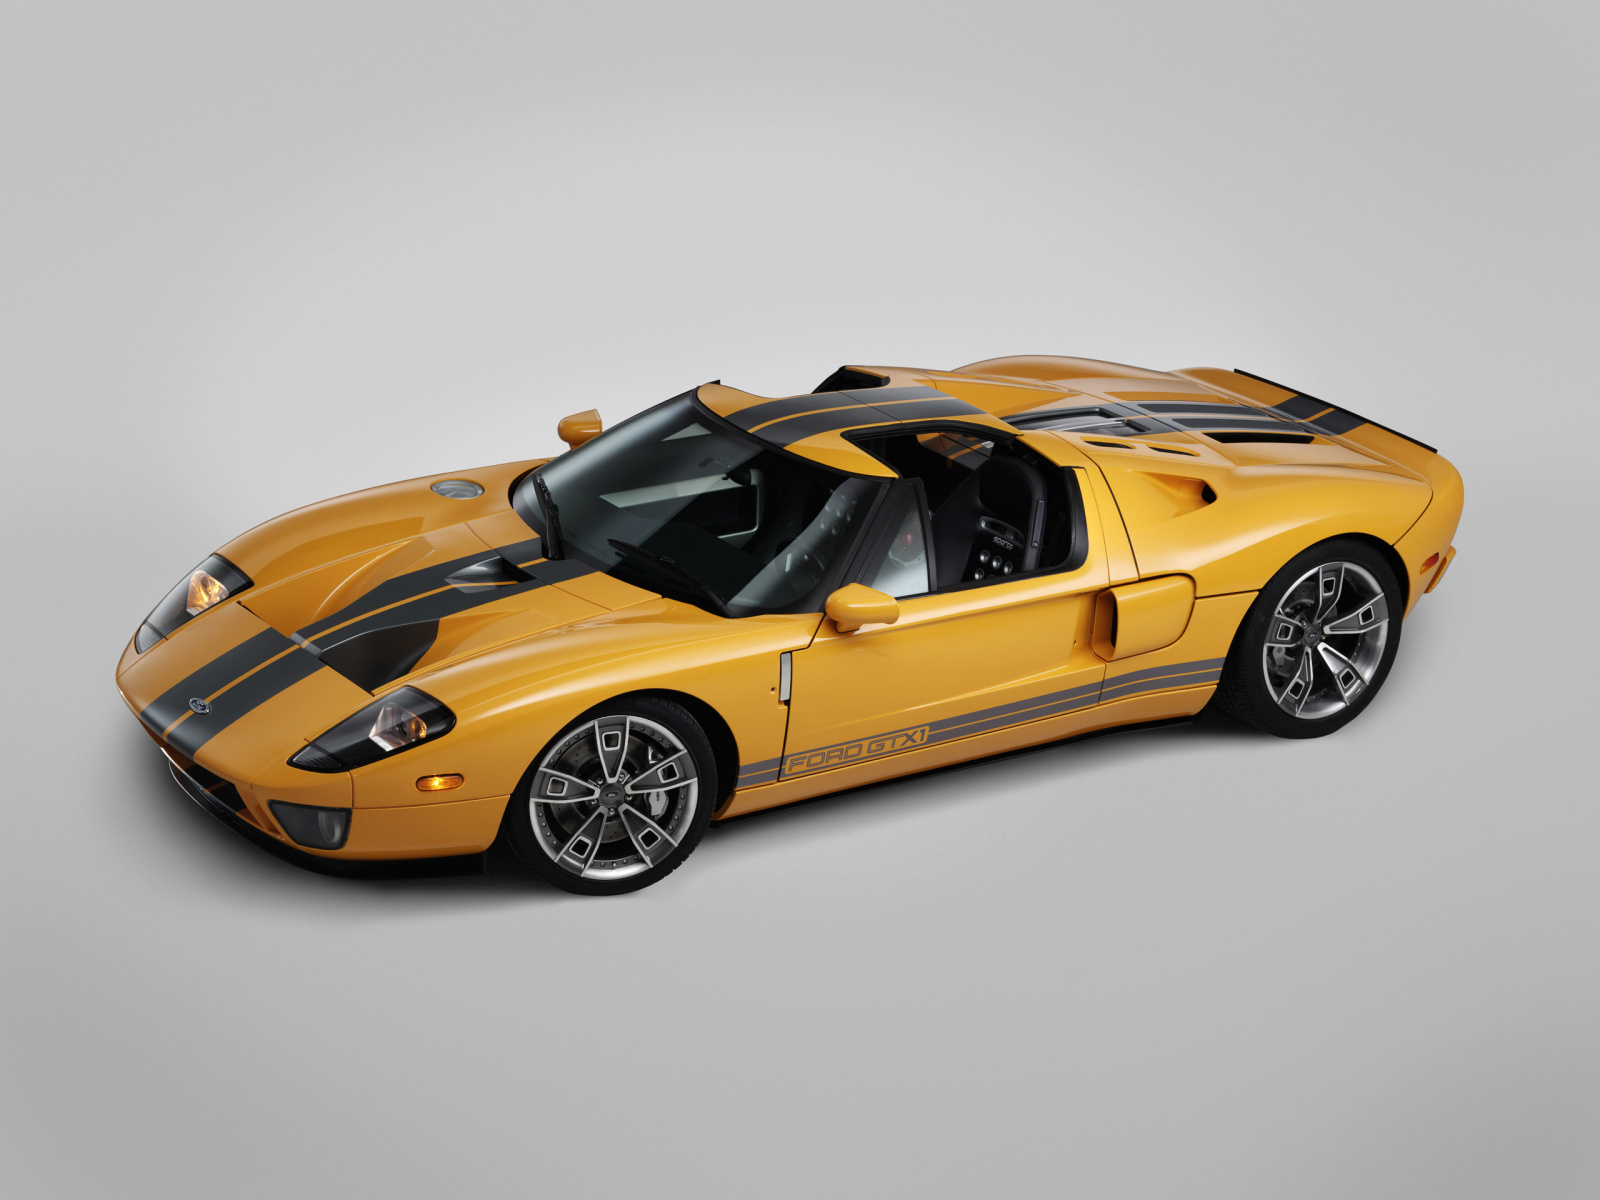 Ford GTX1 Roadster Concept - Foto eines Ford Concept-Cars